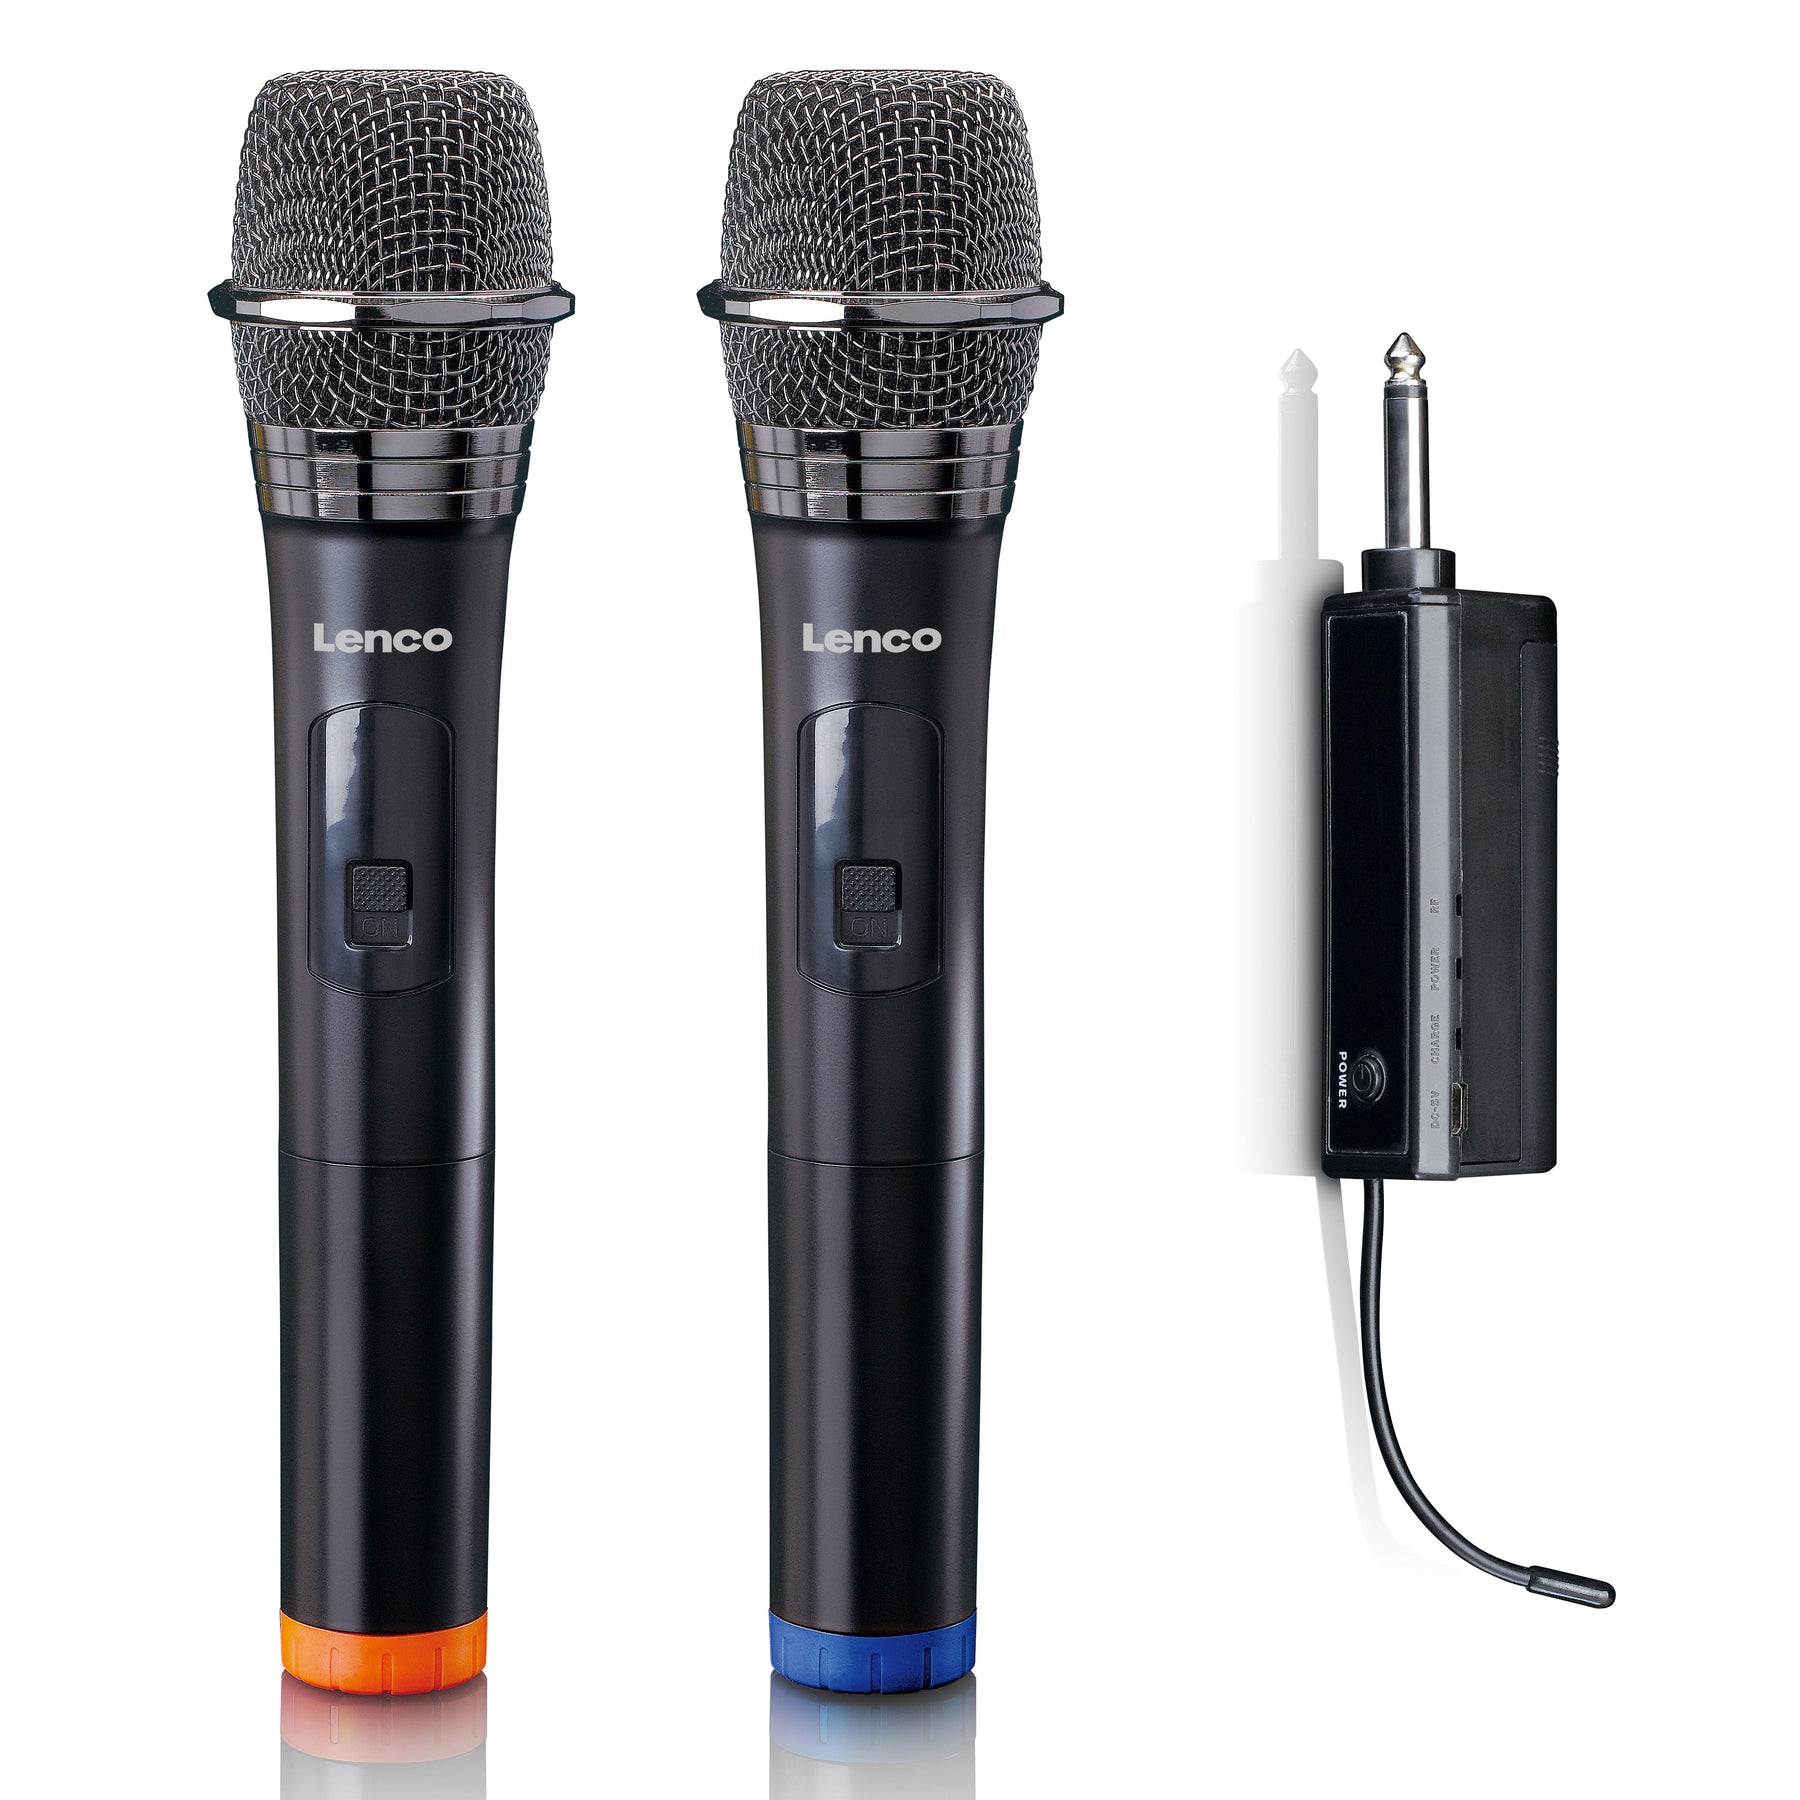 powered MCW-020BK with Set portable wireless microphones receiver battery of 2 - - LENCO